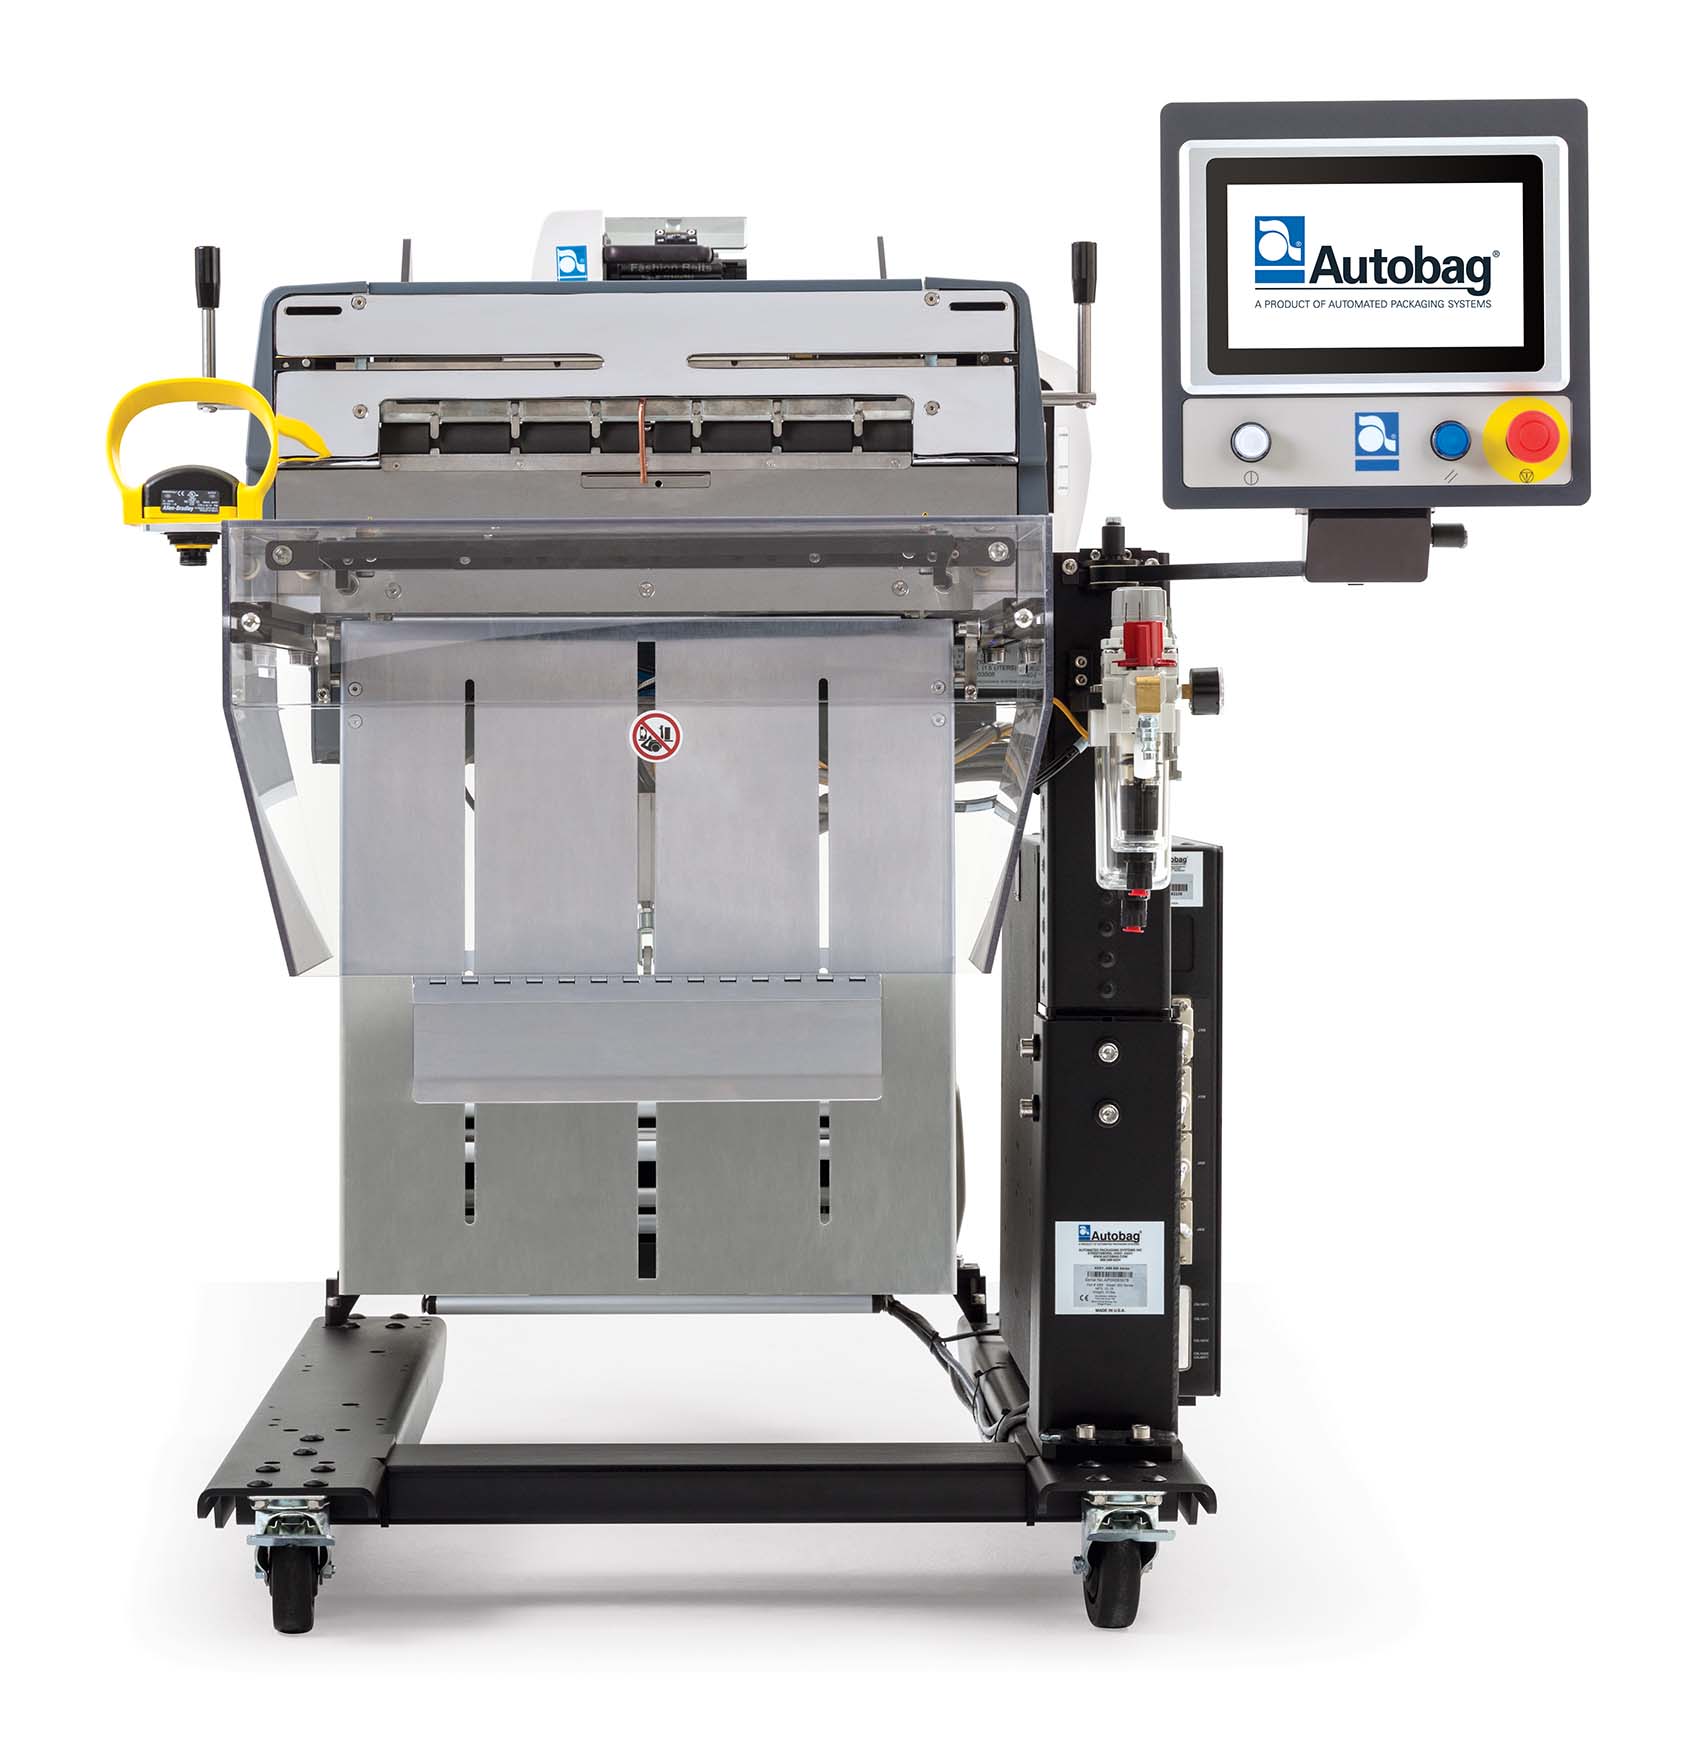 AutoLabel 600P high resolution inline printer front view